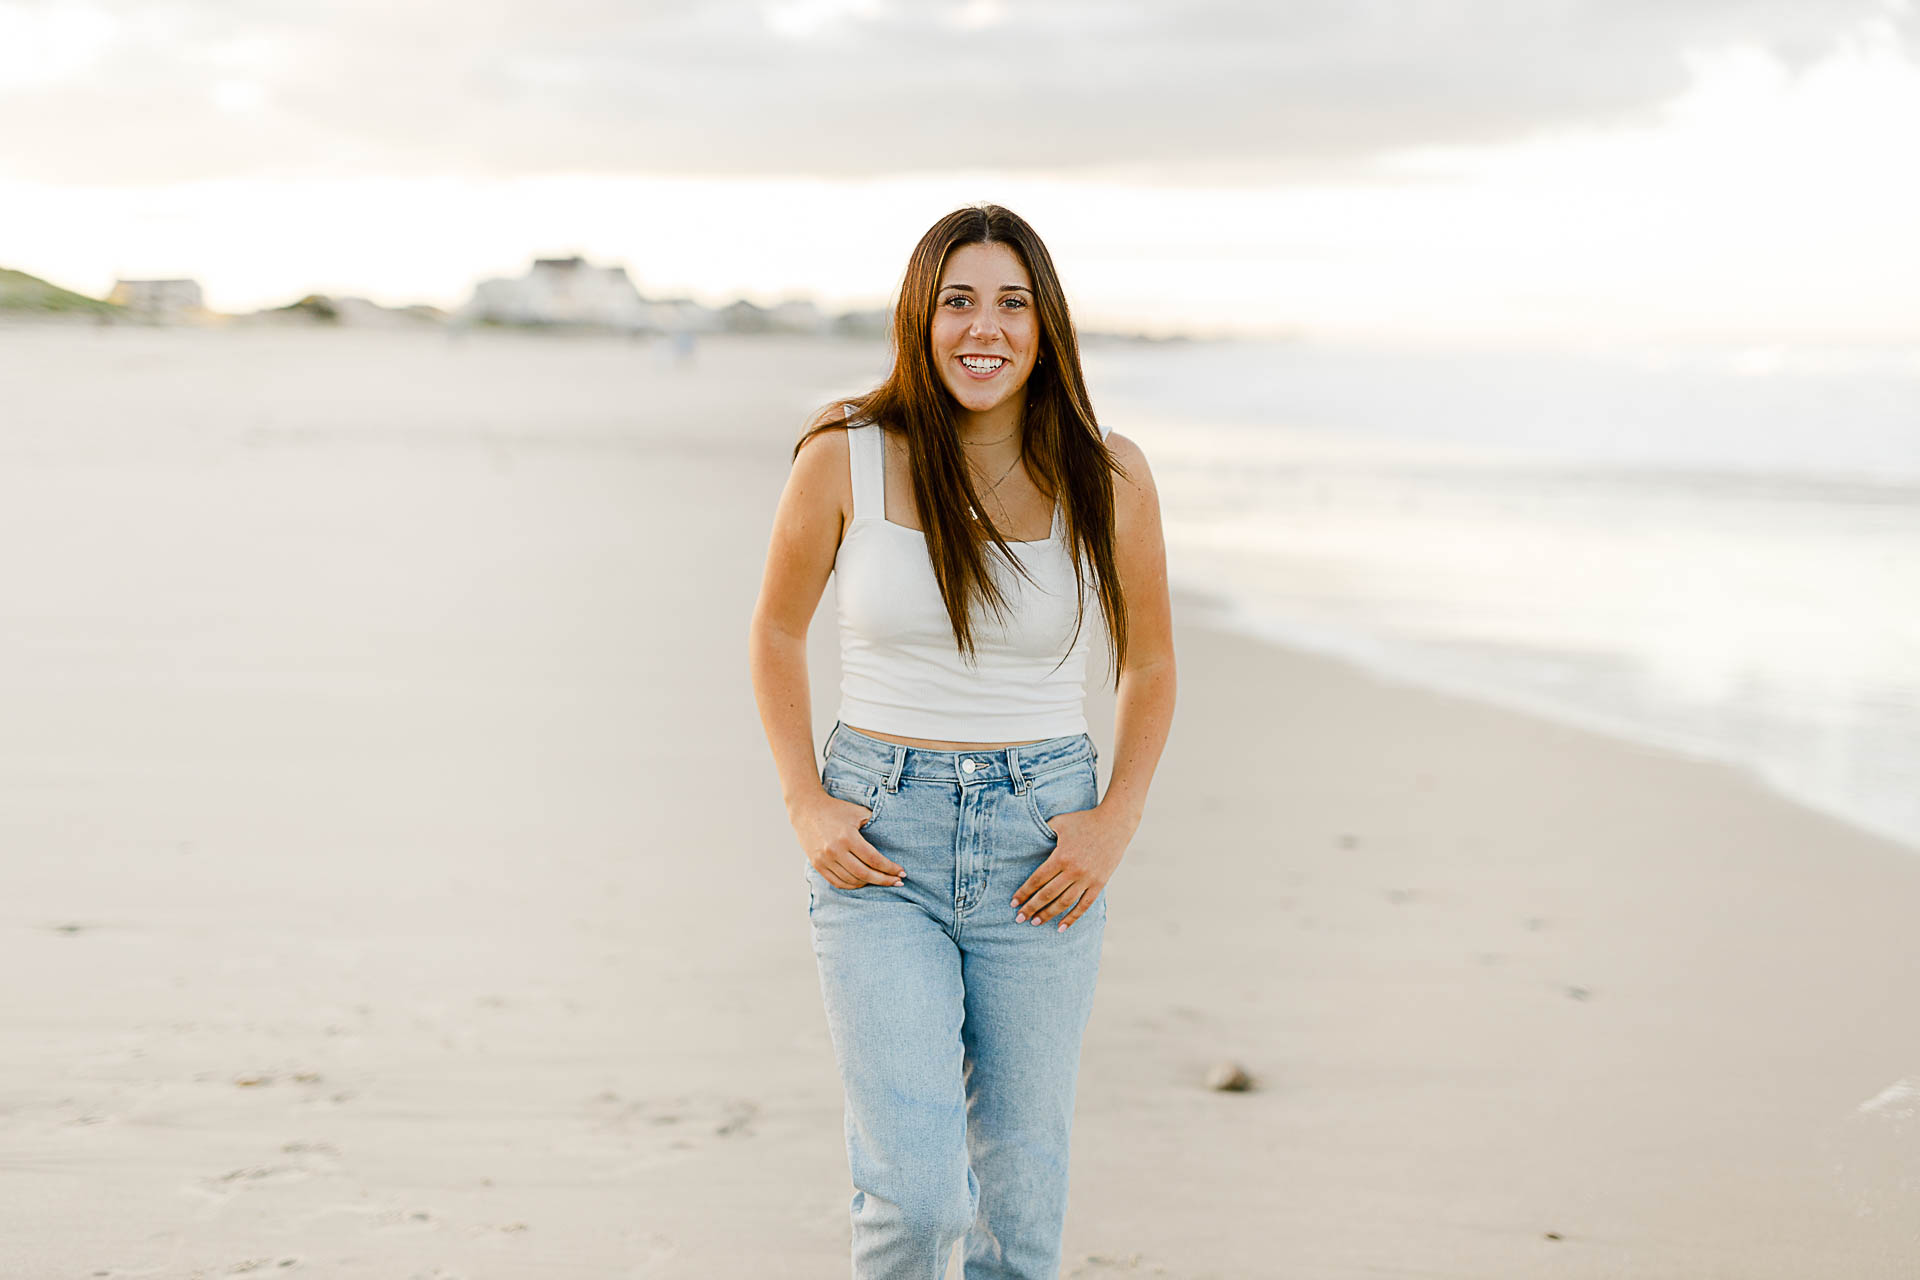 Photo by Norwell Senior Portrait Photographer Christina Runnals | High school girl walking on the beach and laughing